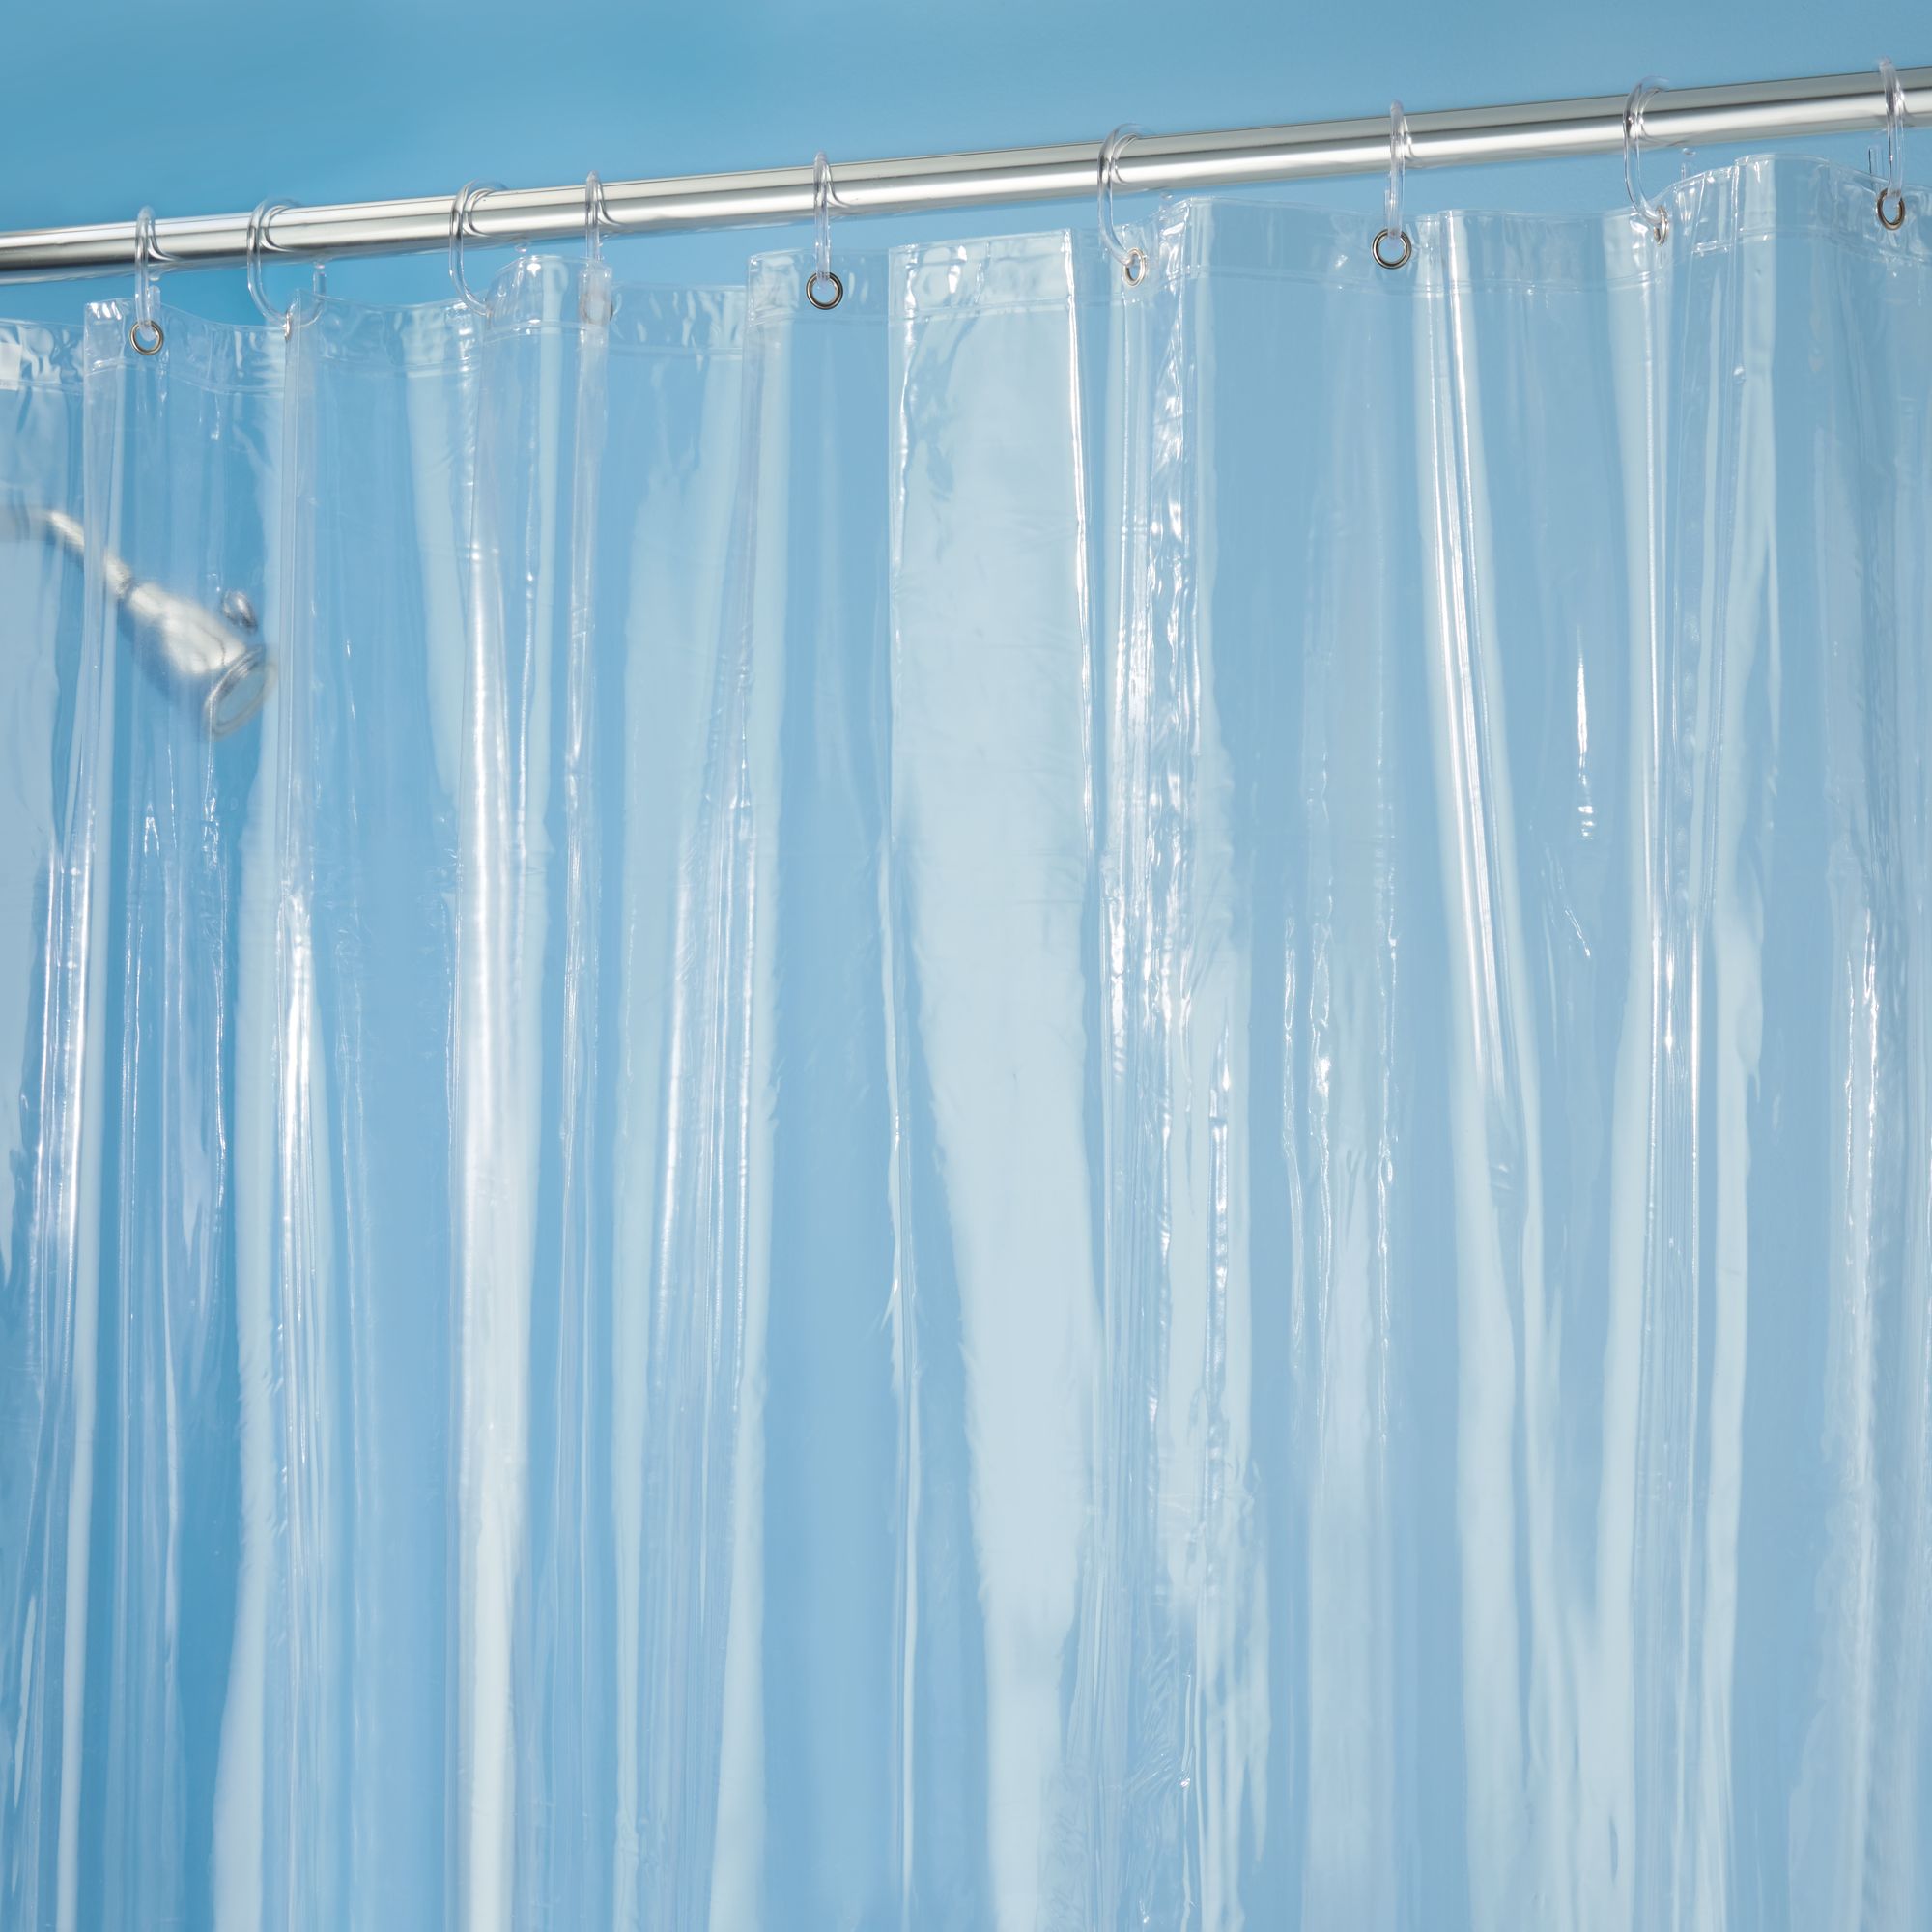 iDesign Vinyl Shower Curtain, Mold- and Mildew-Resistant Water ...